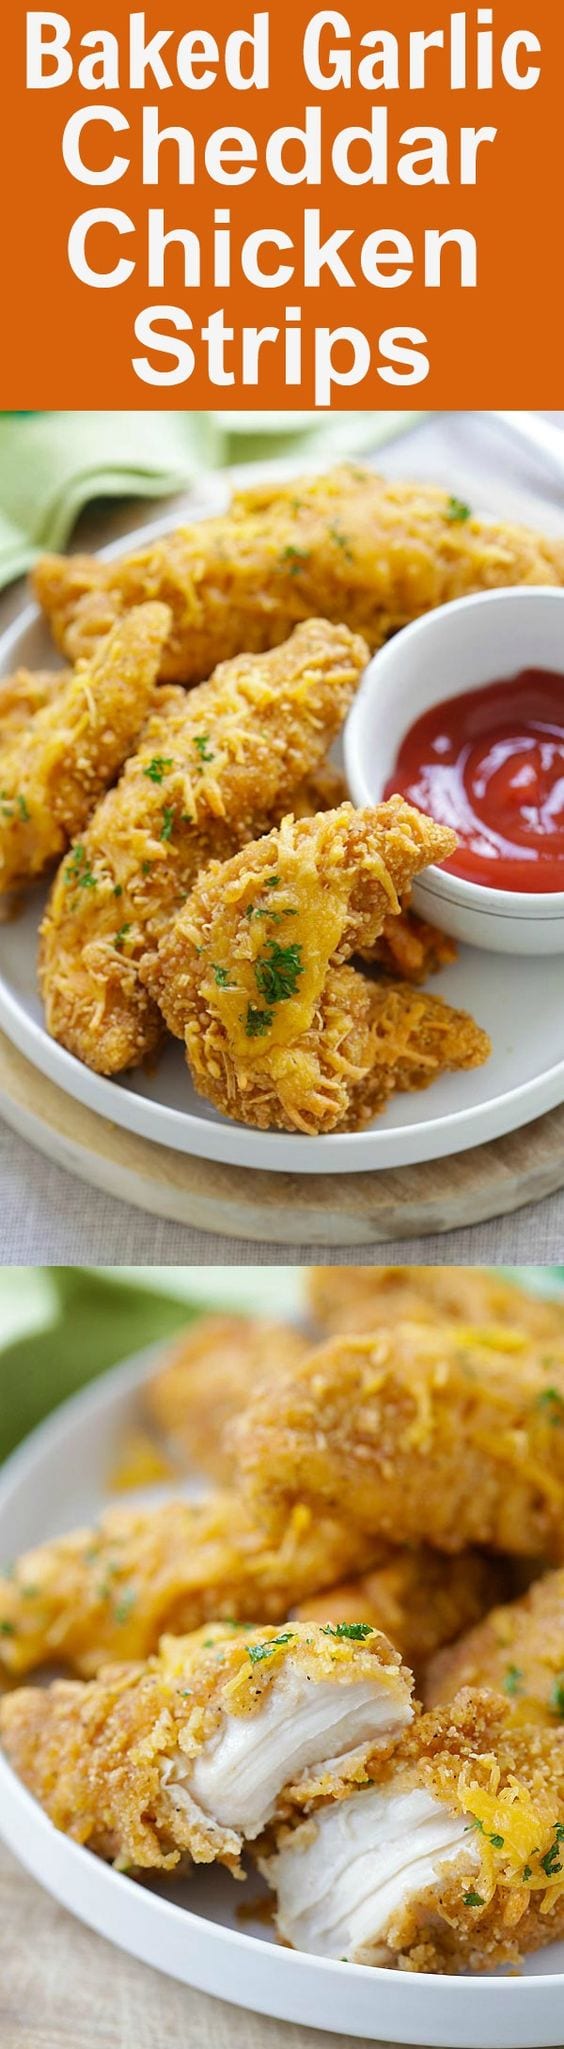 Baked Garlic Cheddar Chicken Strips – the easiest and quickest baked chicken tenders ever with cheddar cheese and garlic, so good | rasamalaysia.com